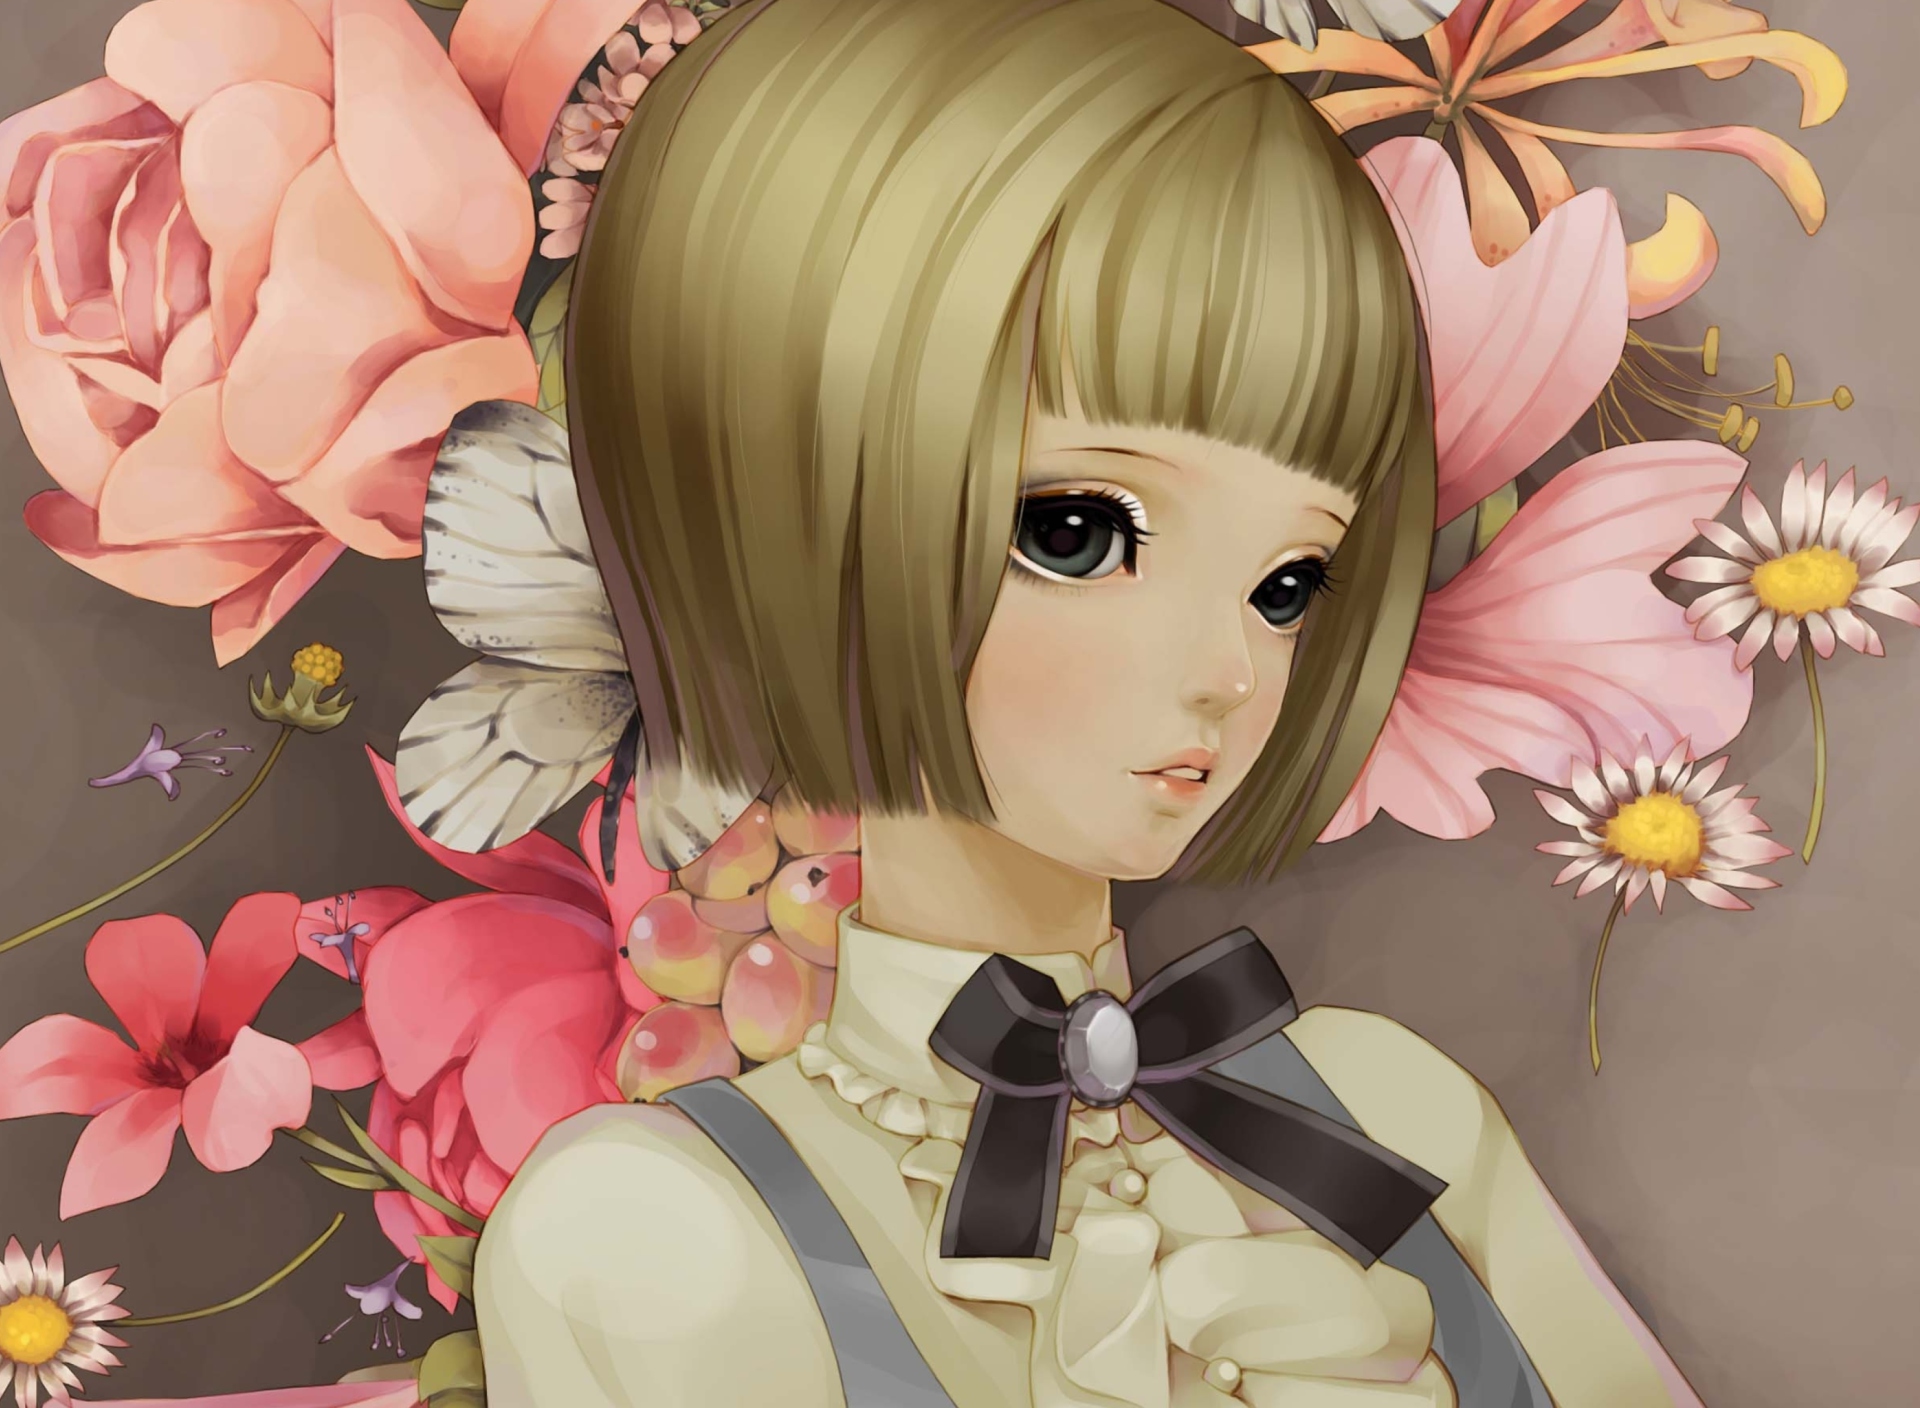 Anime Style Girl And Pink Flowers screenshot #1 1920x1408